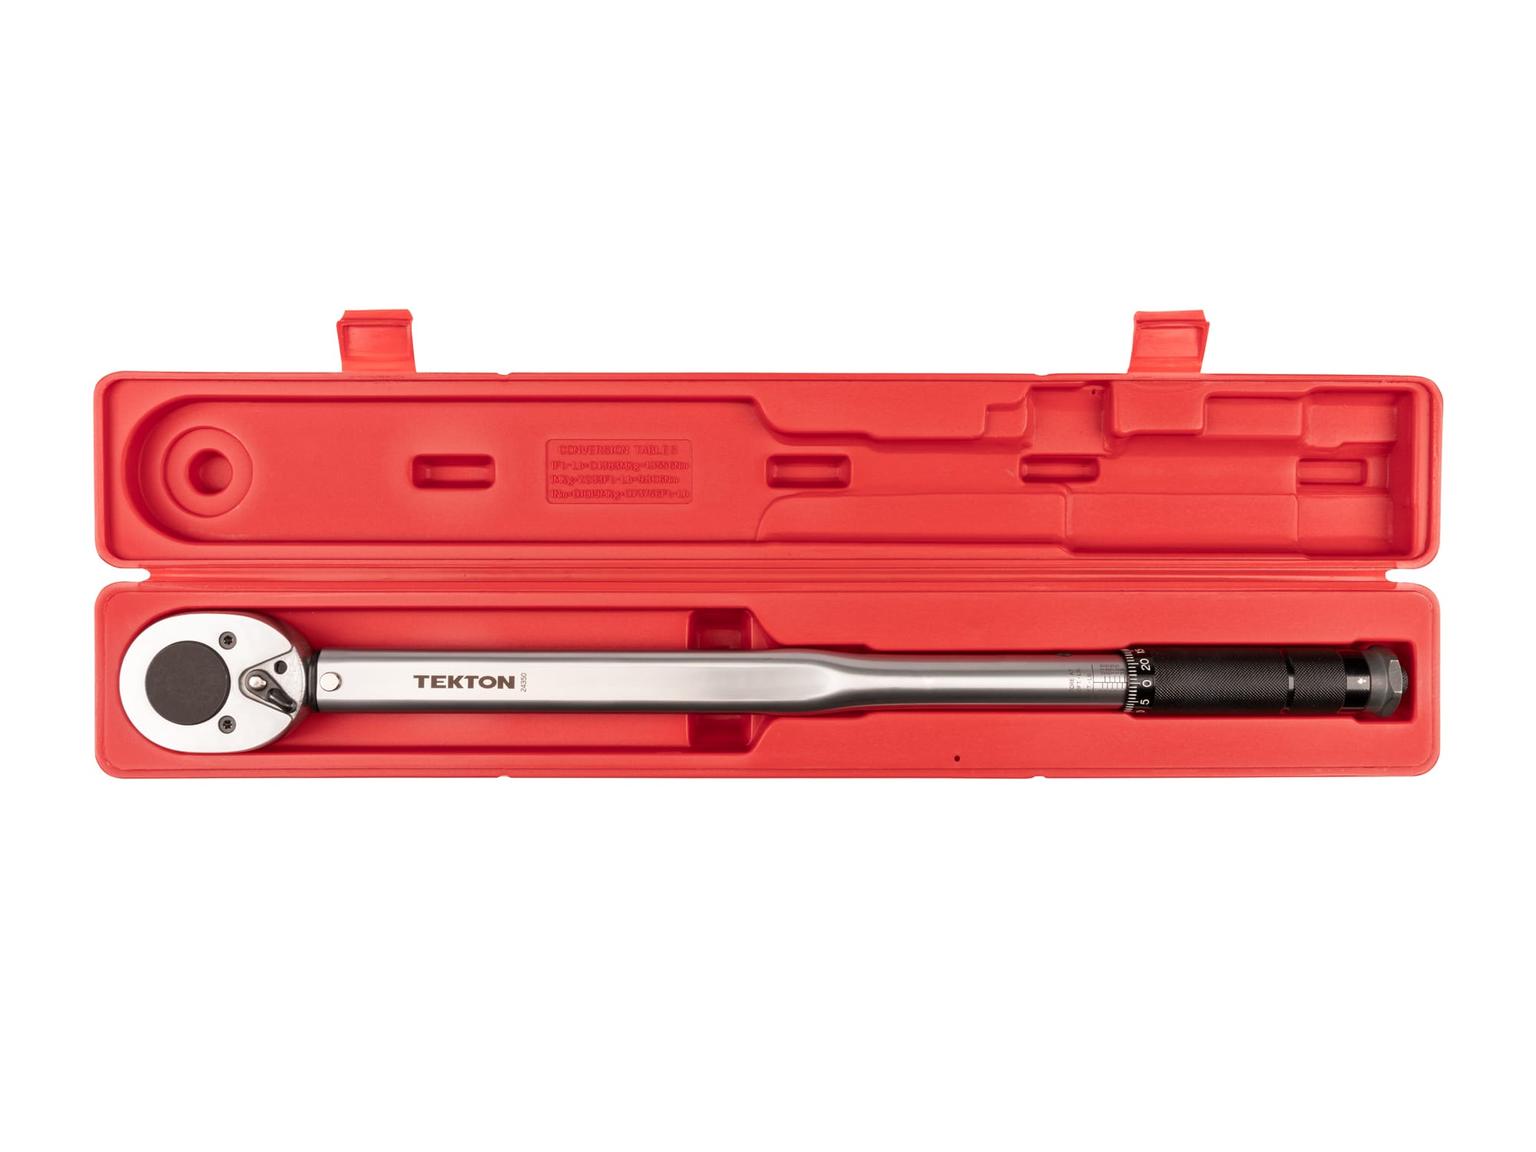 TEKTON 24350-D 3/4 Inch Drive Micrometer Torque Wrench (50-300 ft.-lb.)